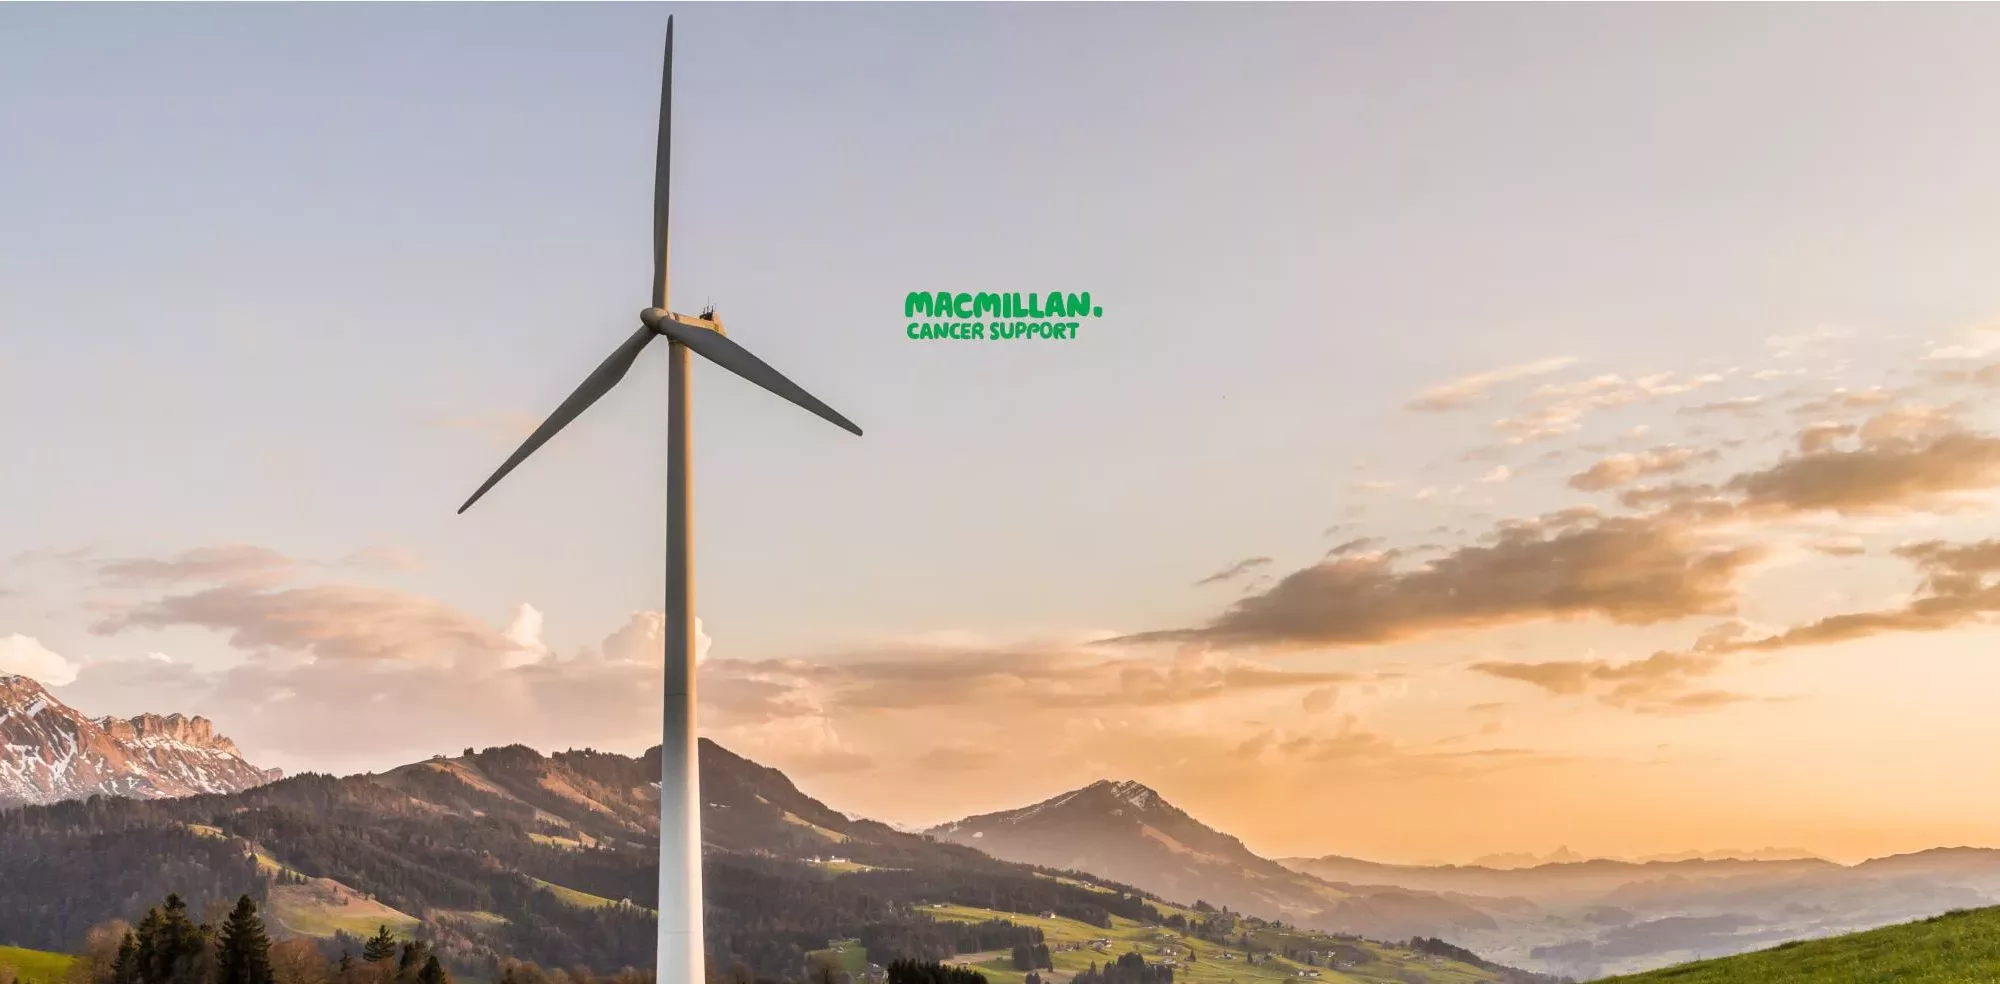 Charities - Macmillan Support Logo Displayed Over An Image Of Rolling Hills And A Wind Turbine